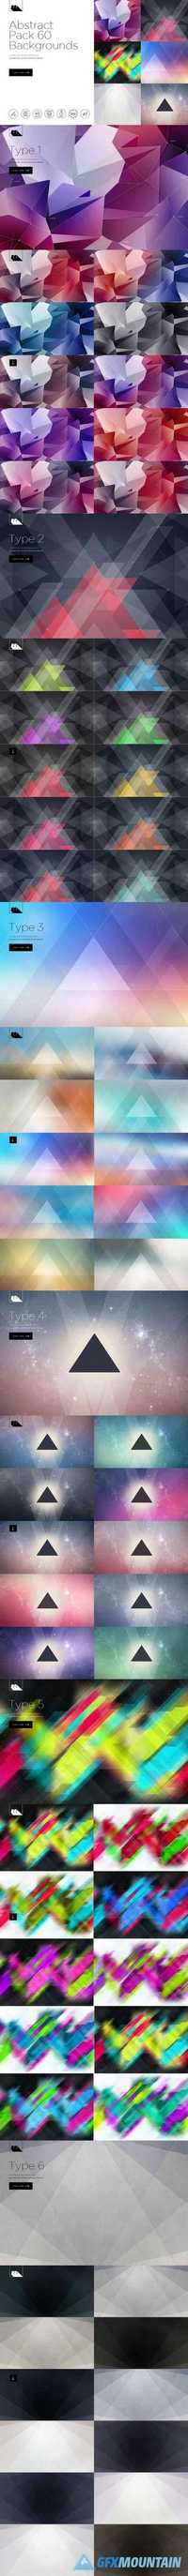 60 Abstract Backgrounds Pack 737135